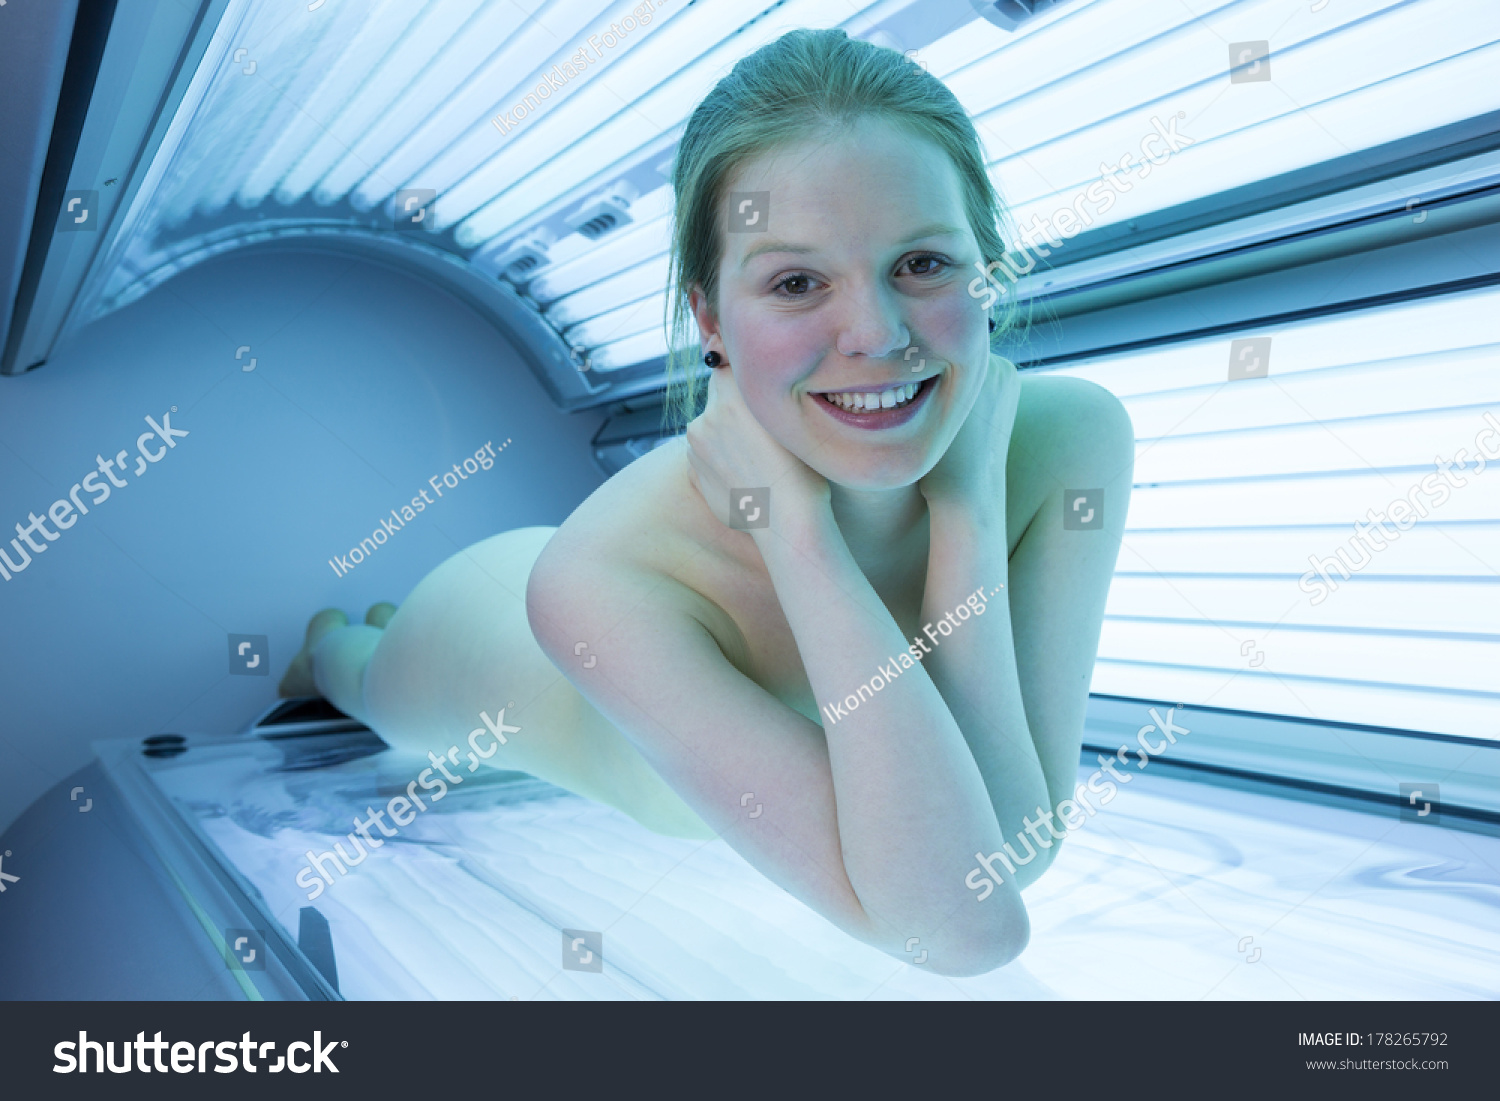 Nude Tanning Pictures